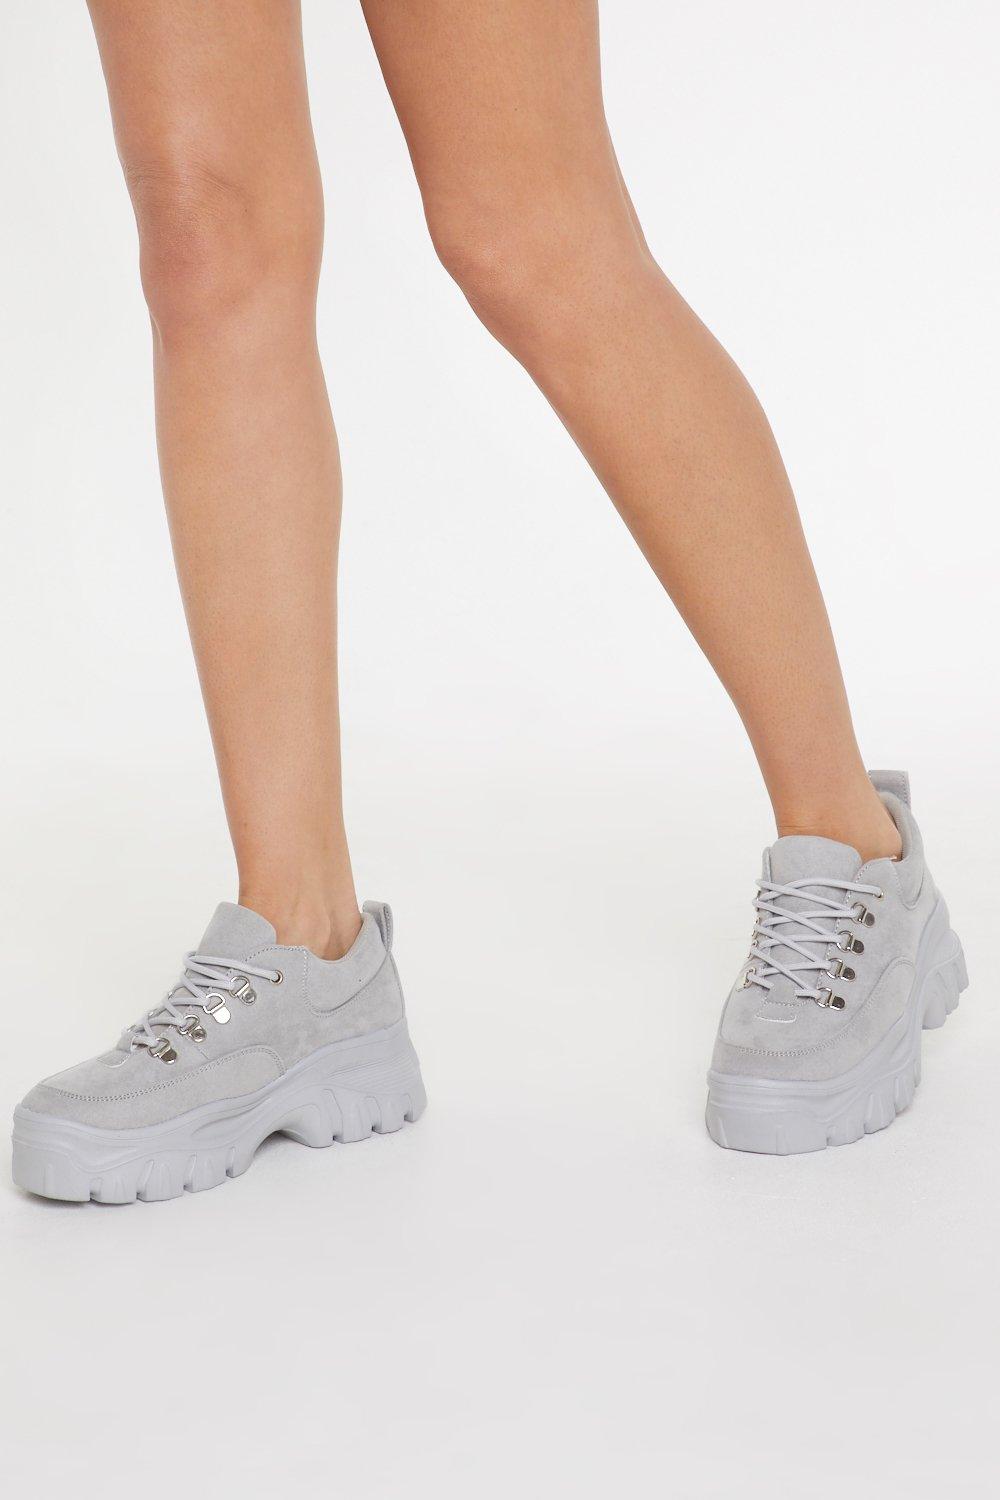 grey chunky shoes